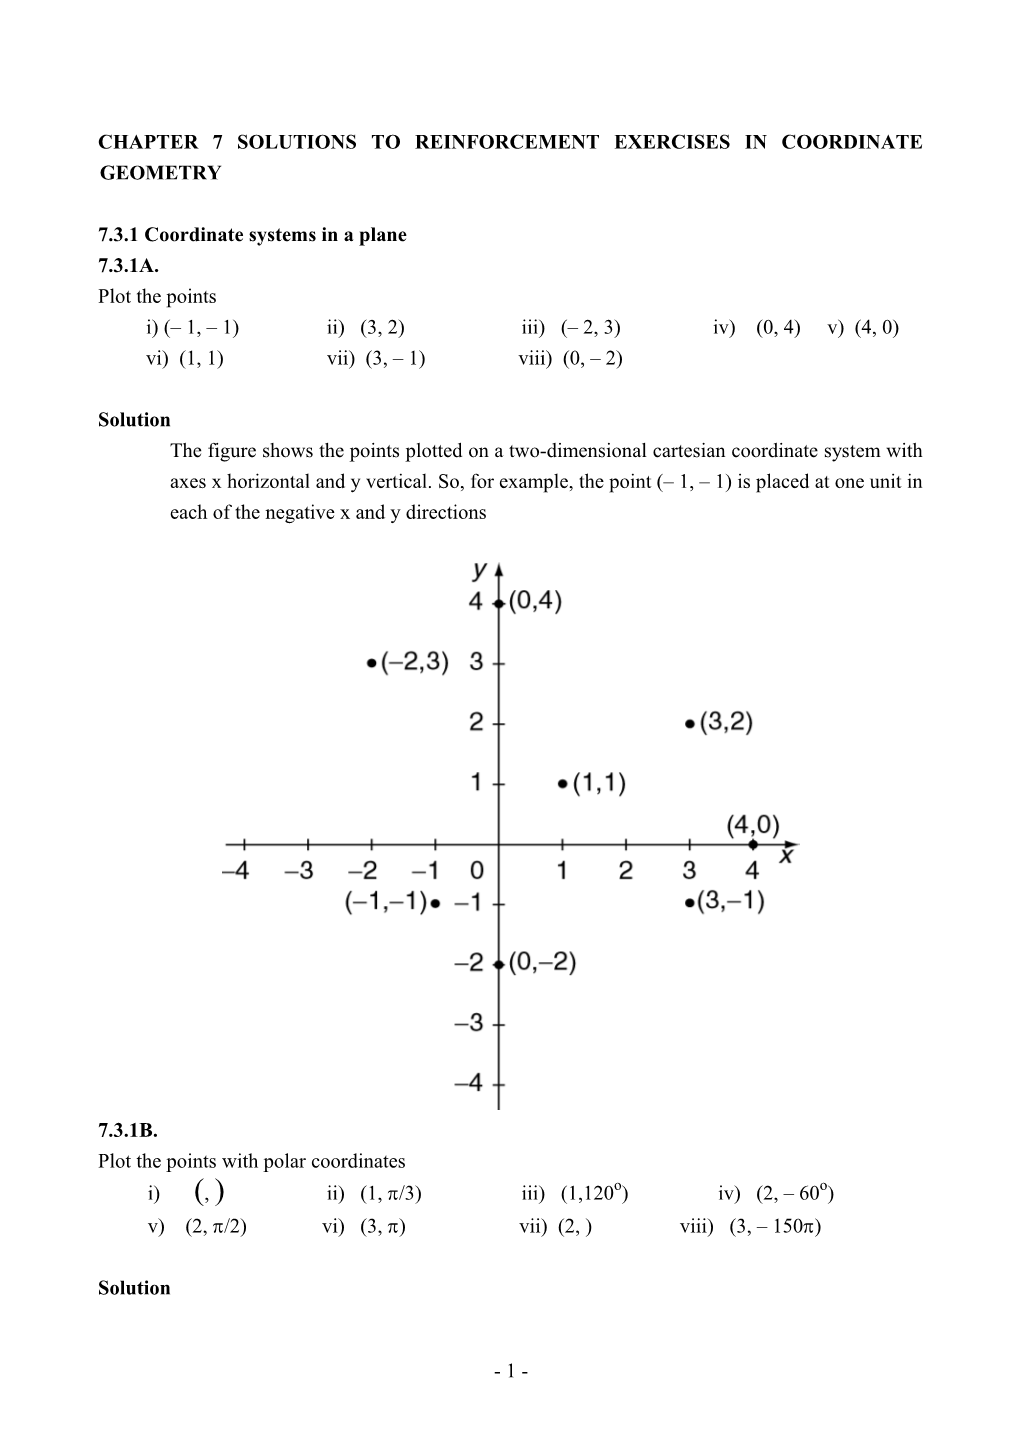 Chapter 7 Solutions to Reinforcement Exercises in Coordinate Geometry